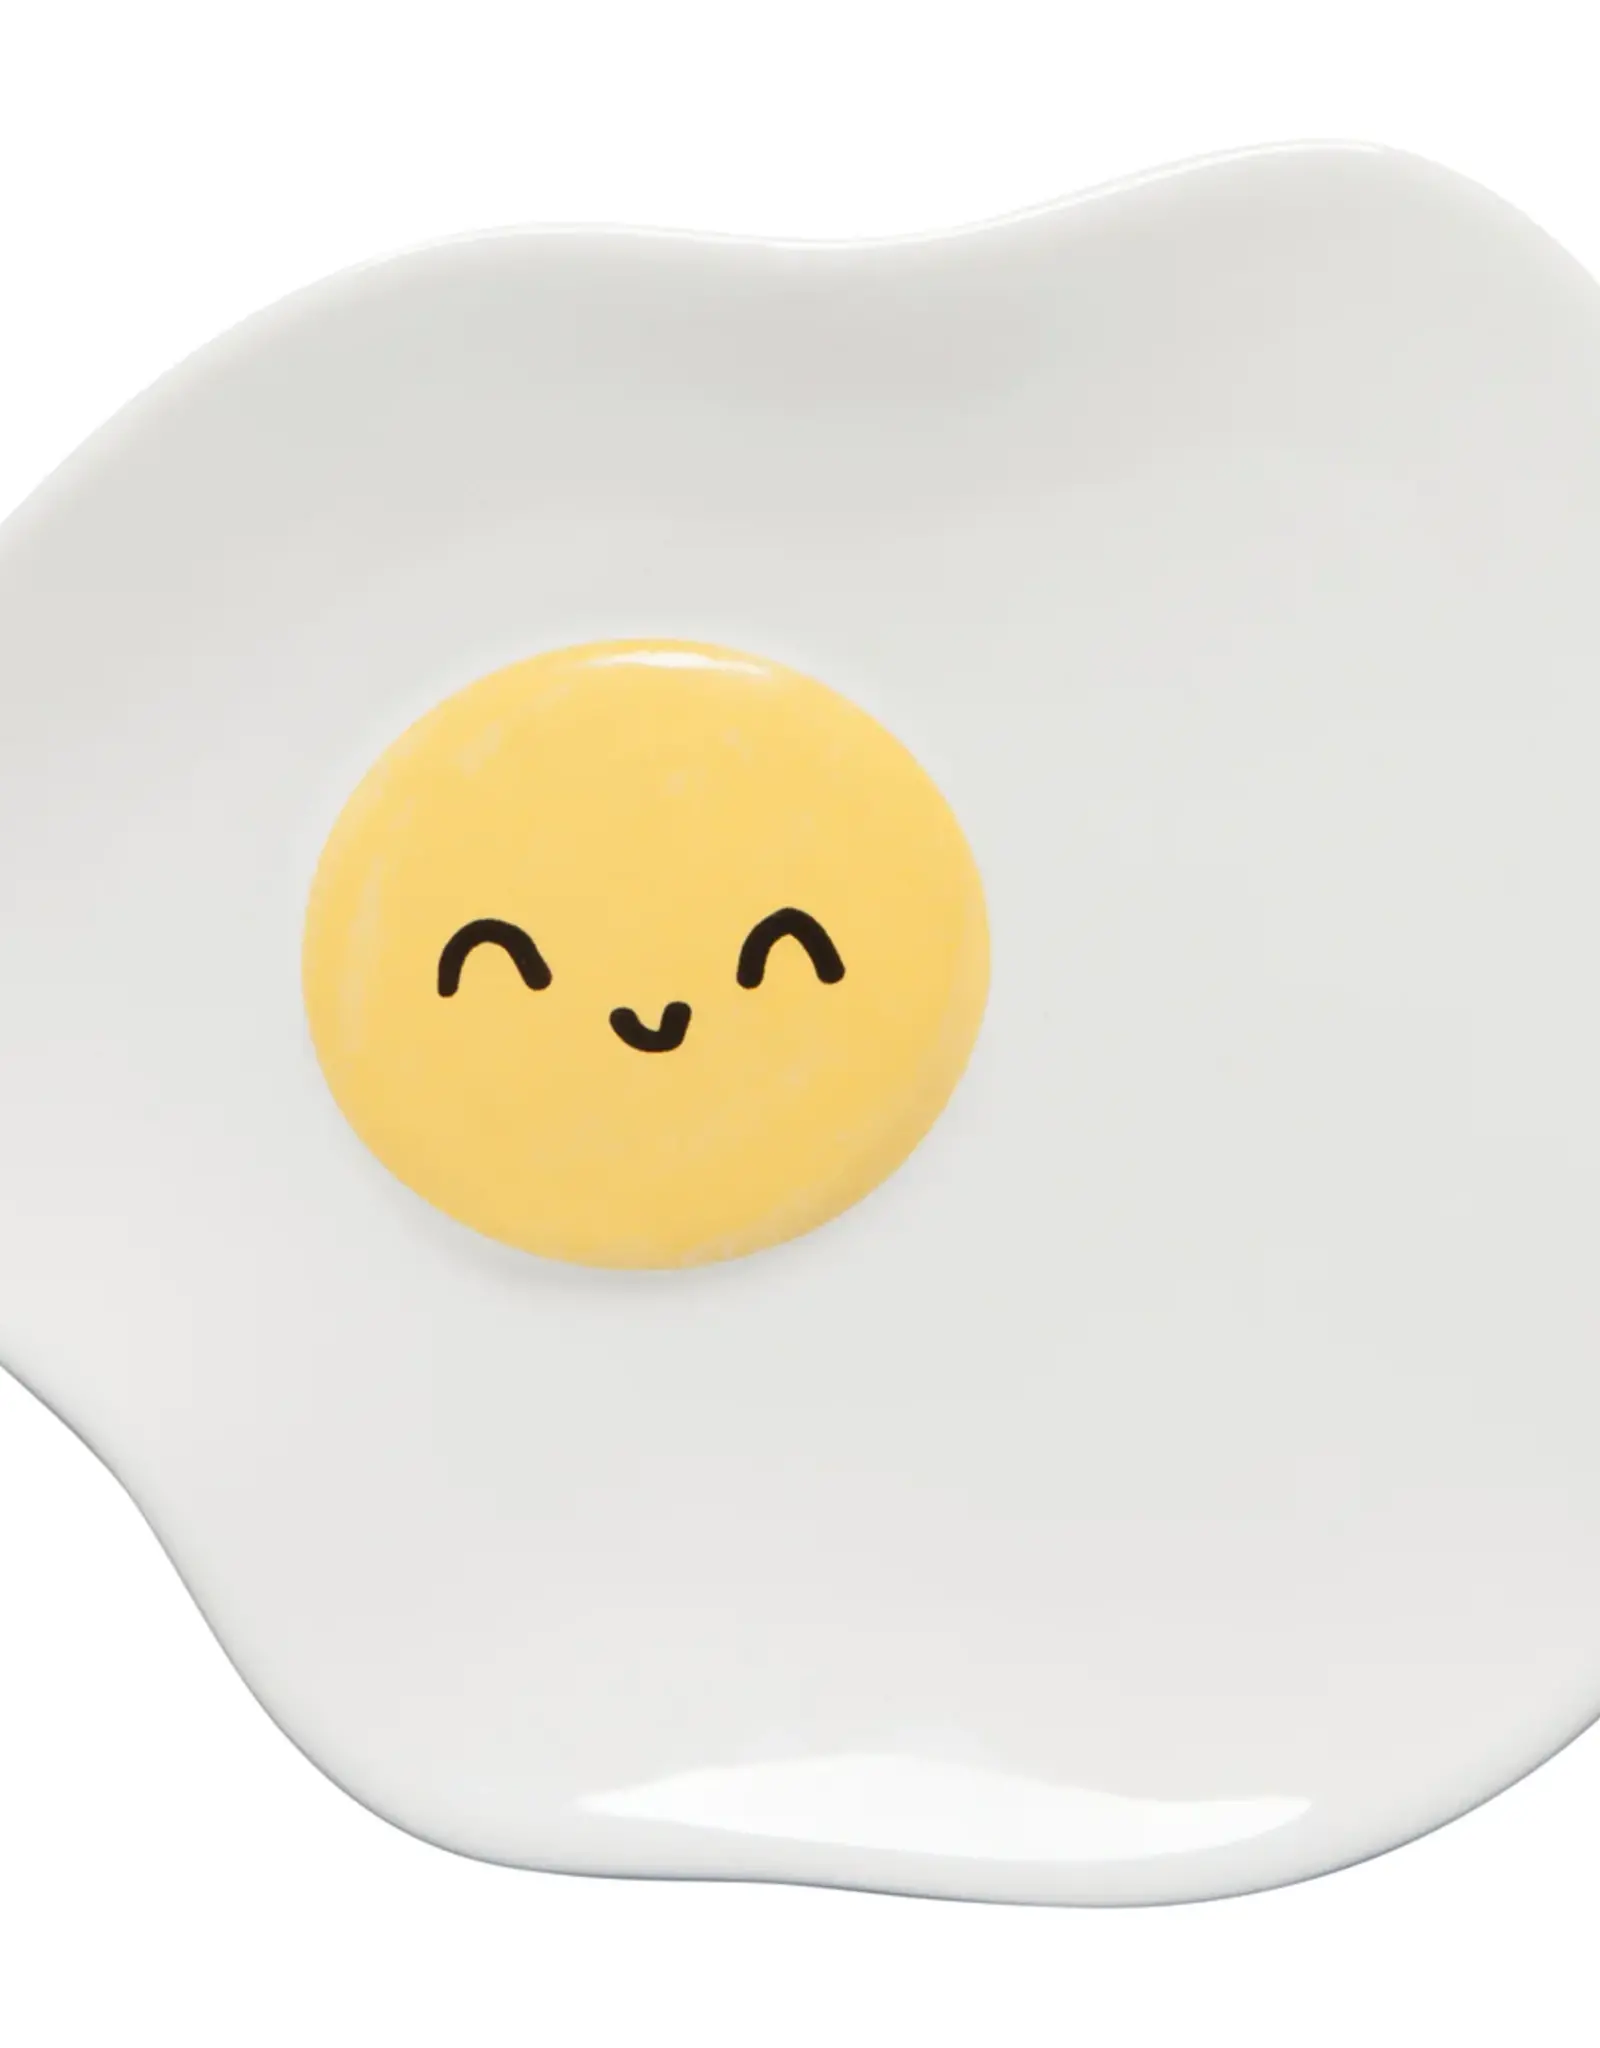 Danica + Now Designs Shaped Dish - Funny Food: Egg